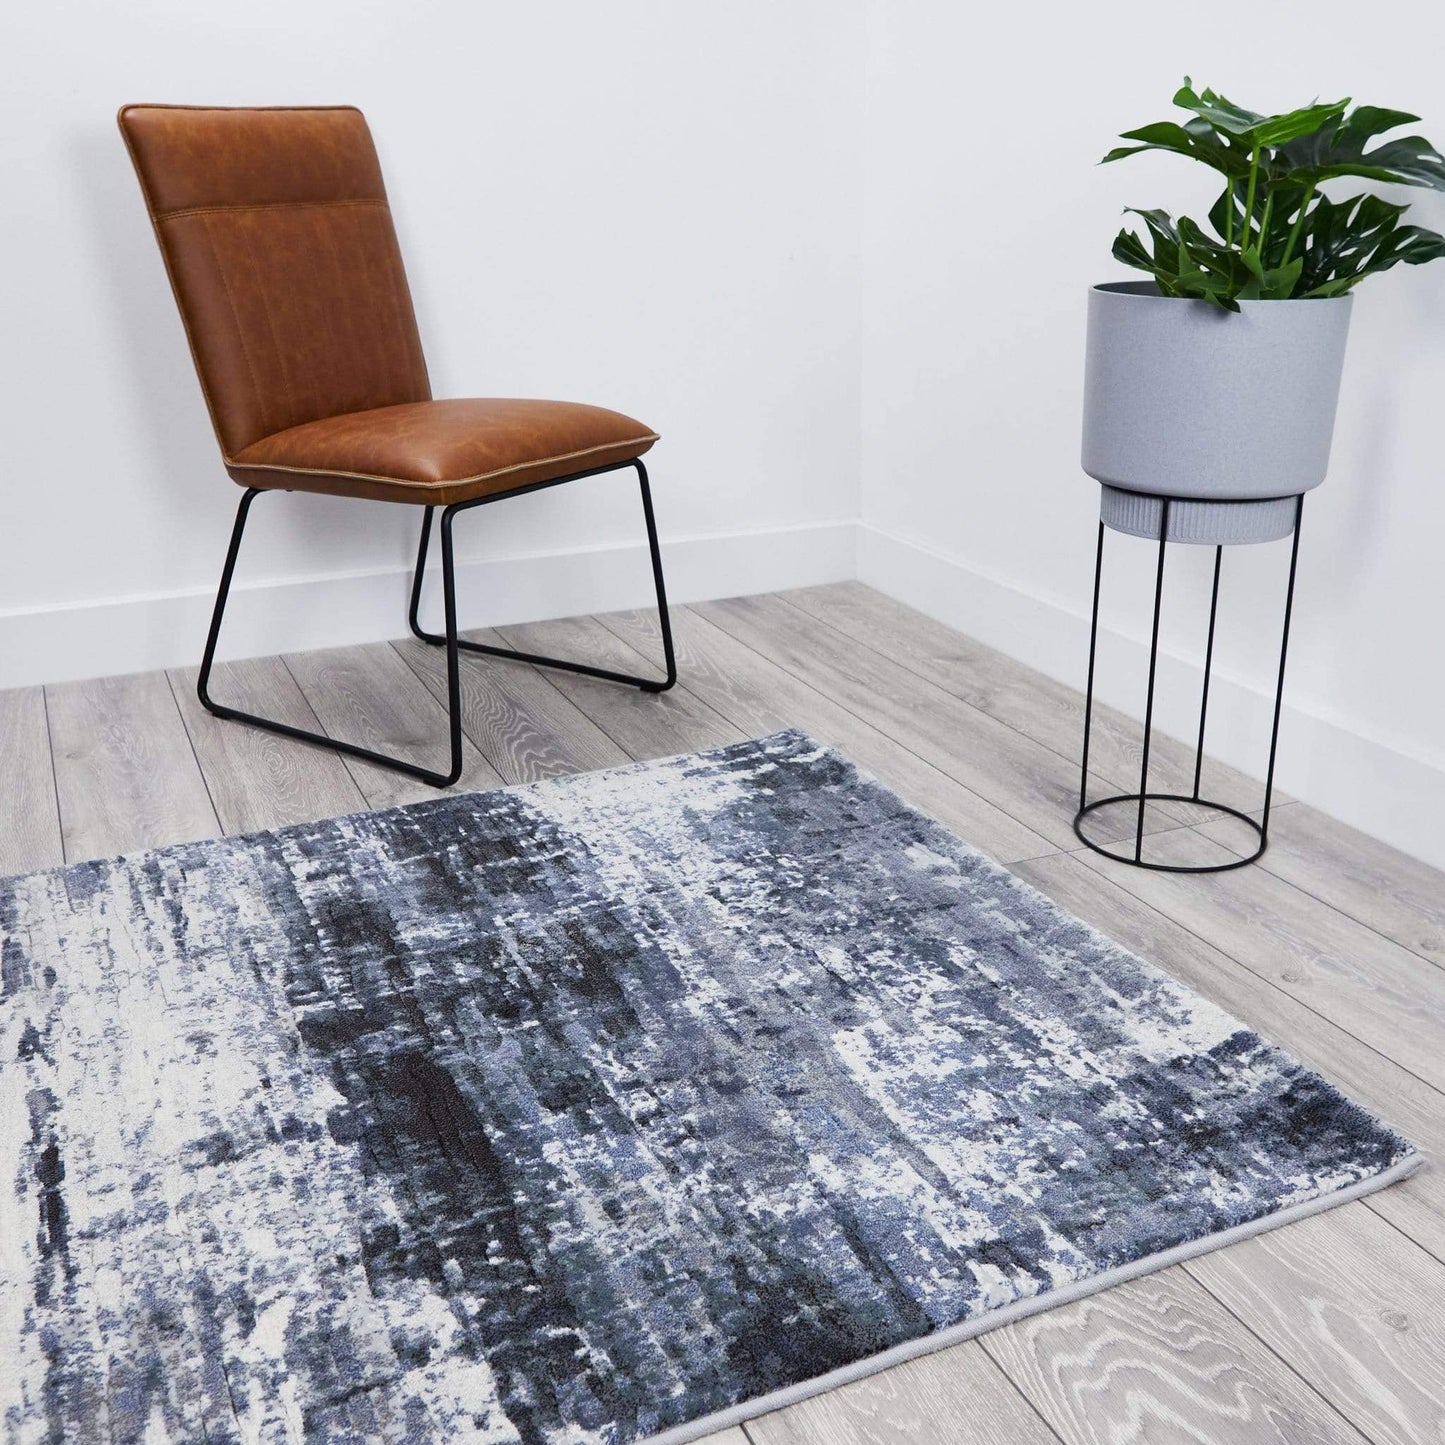 Rugs  -  Galleria Blue Abstract Rug - Multiple Sizes  -  50136231